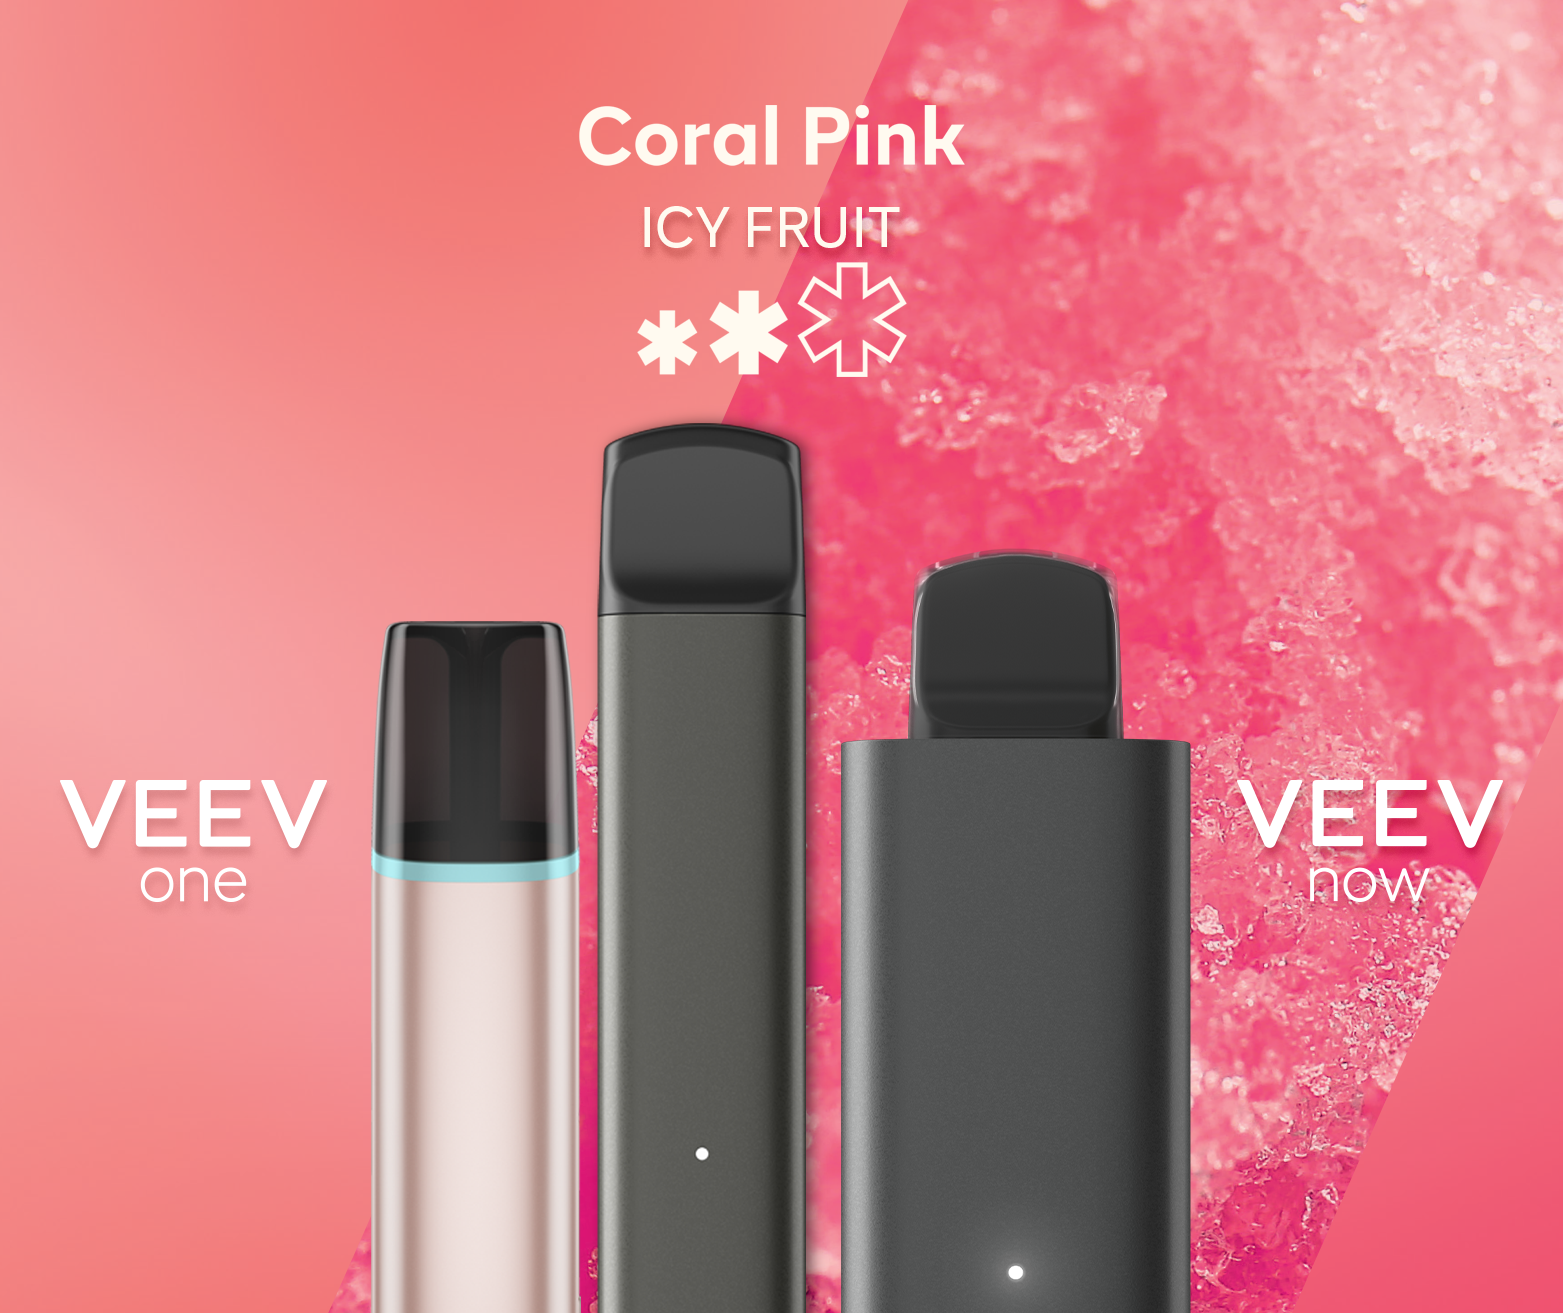 A VEEV ONE pod device and VEEV NOW disposable, both in Coral Pink flavour.